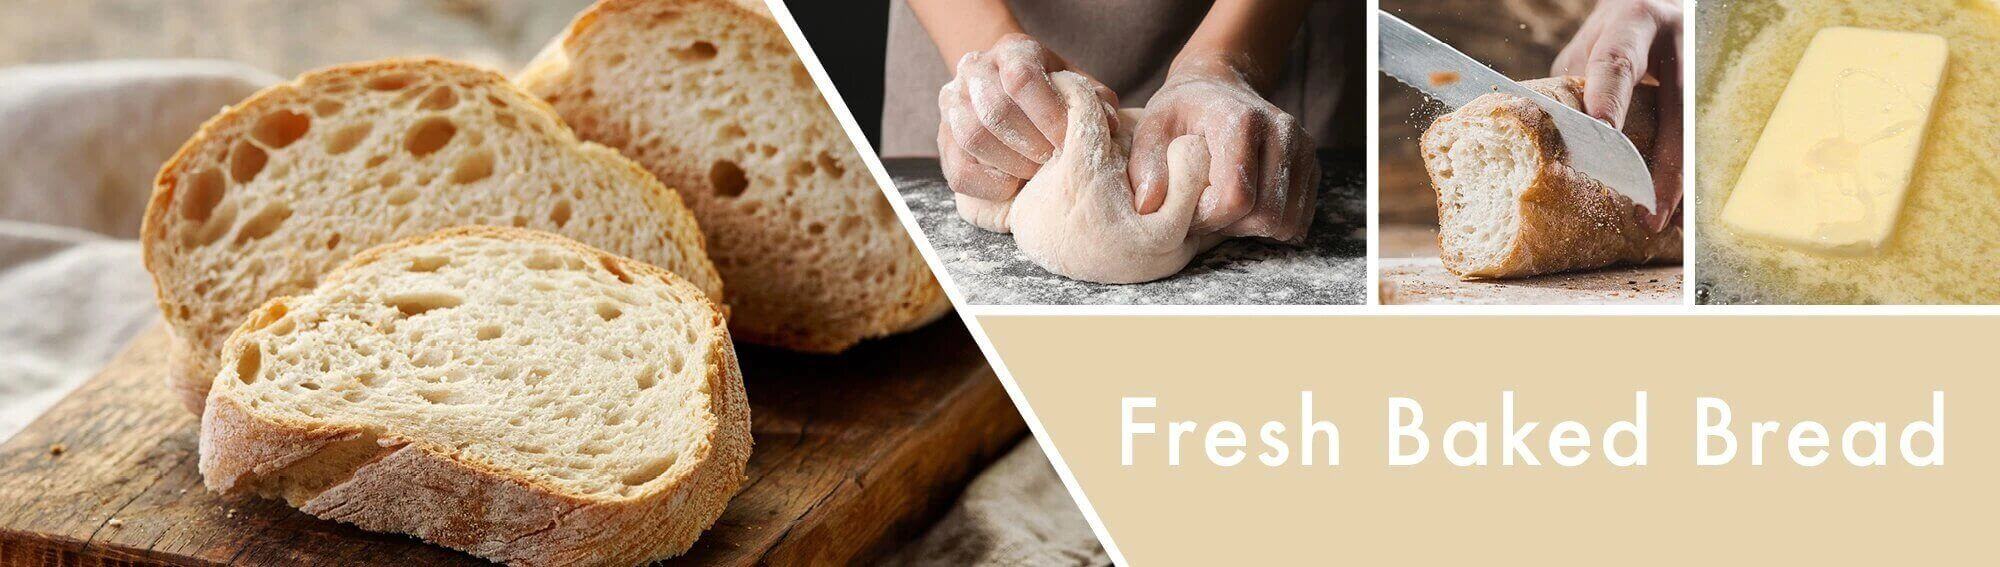 Fresh-Baked-Bread-Candle-Fragrance